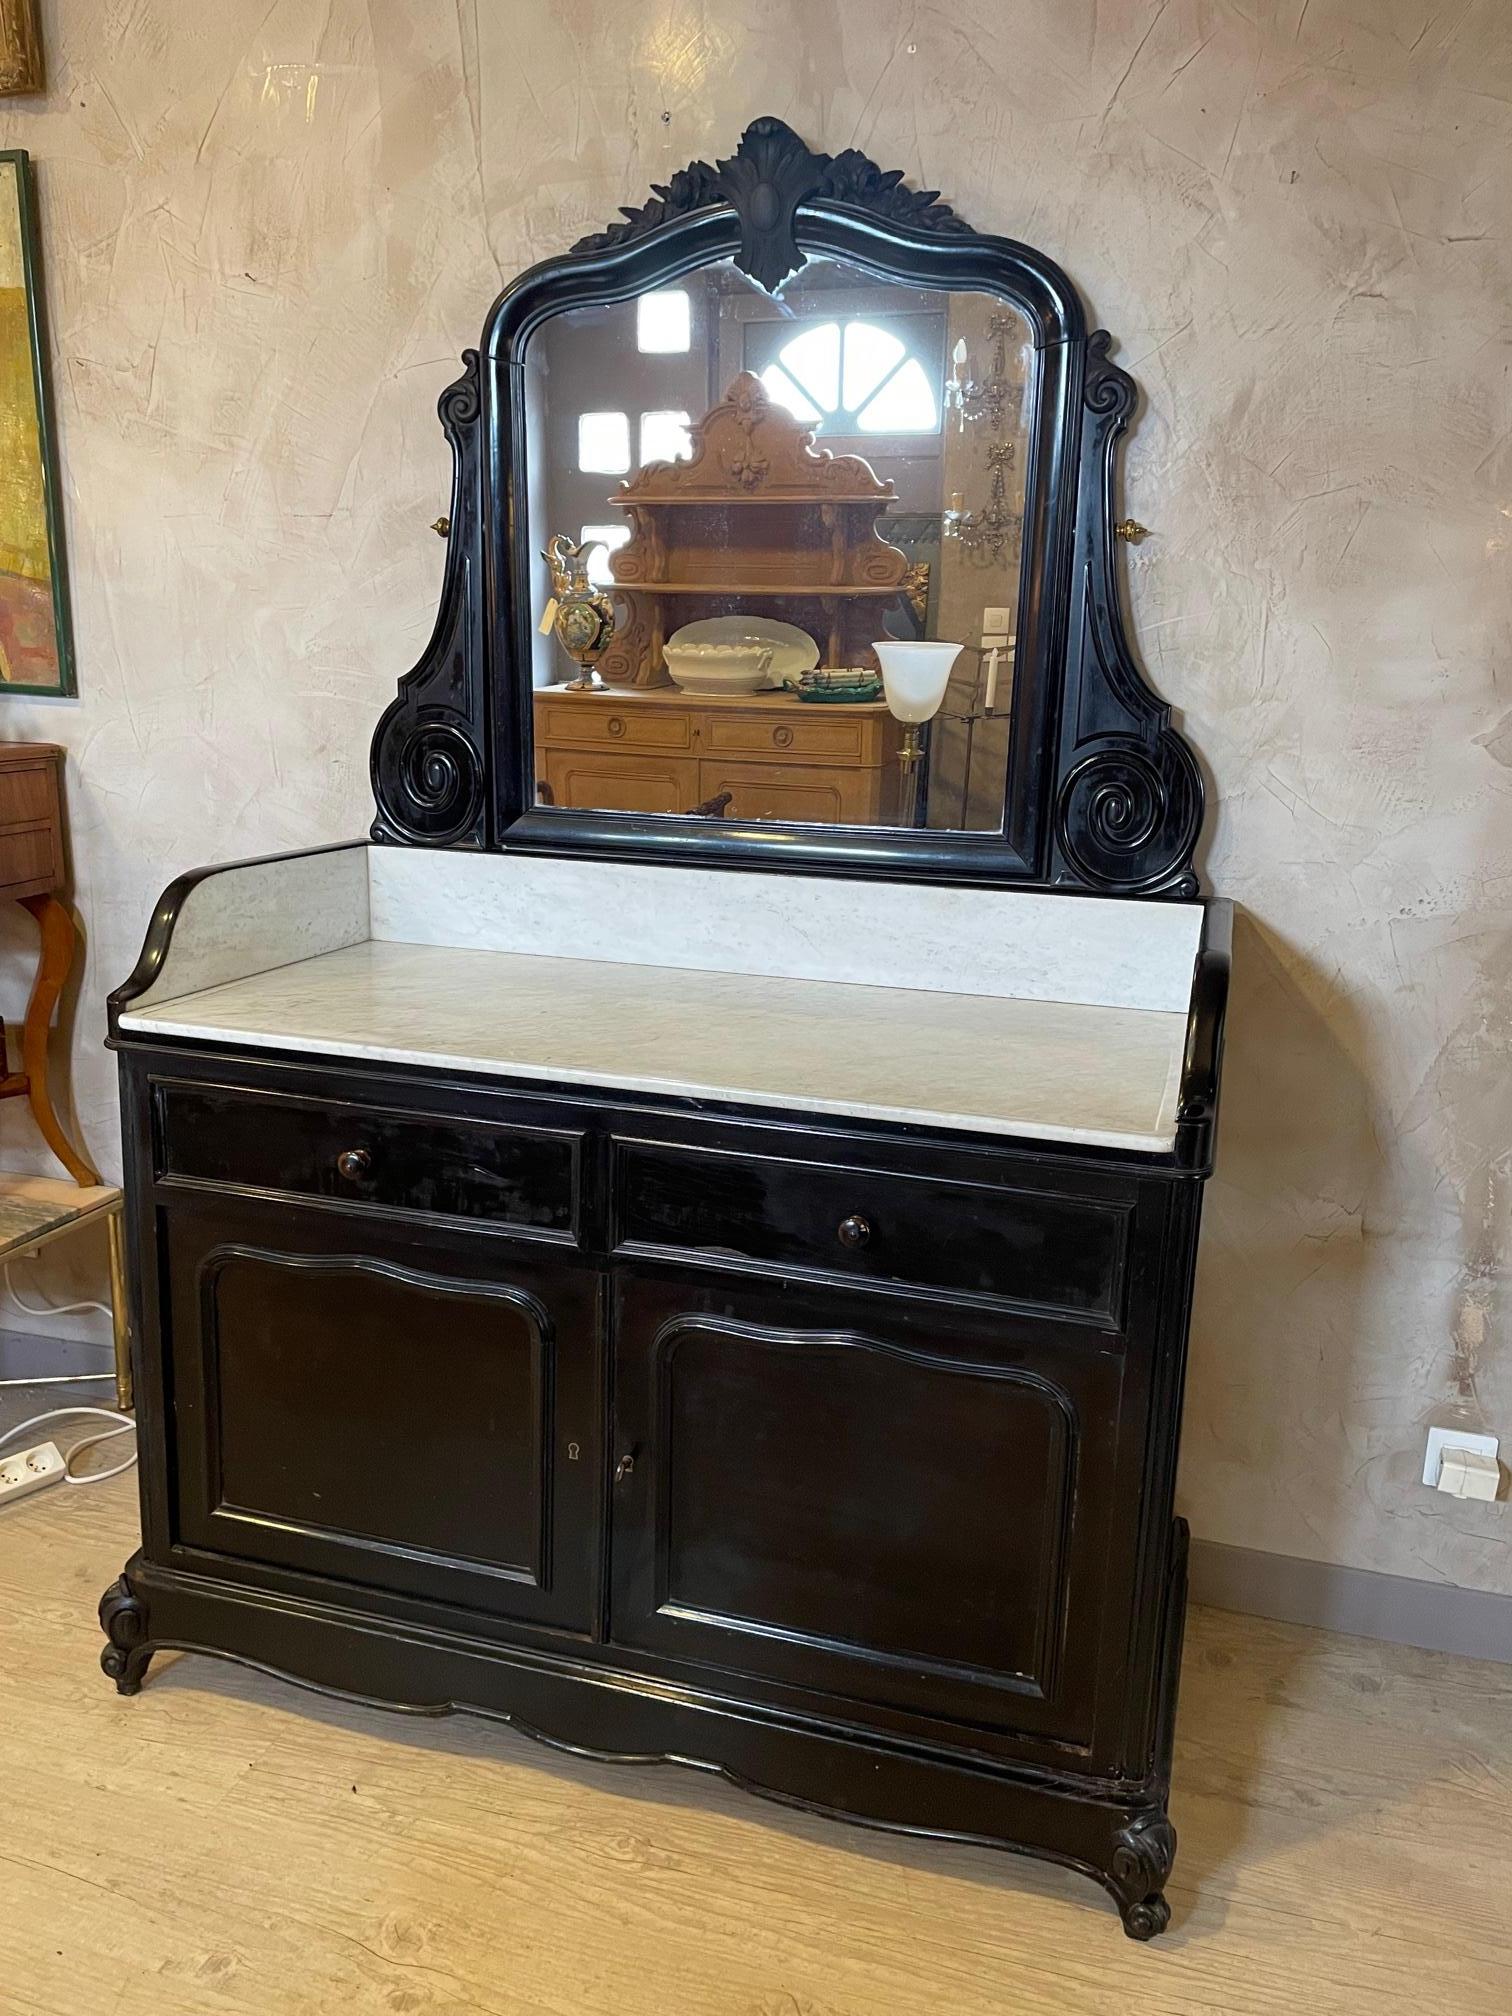 Beautiful Napoleon III blackened pearwood and marble dresser from the 1870s. 
Nice hand carved details of the doors and the top. 
Carrara Marble top. Two drawers and two large doors with a shelf inside. 
Large mirror. 
Some imperfections but